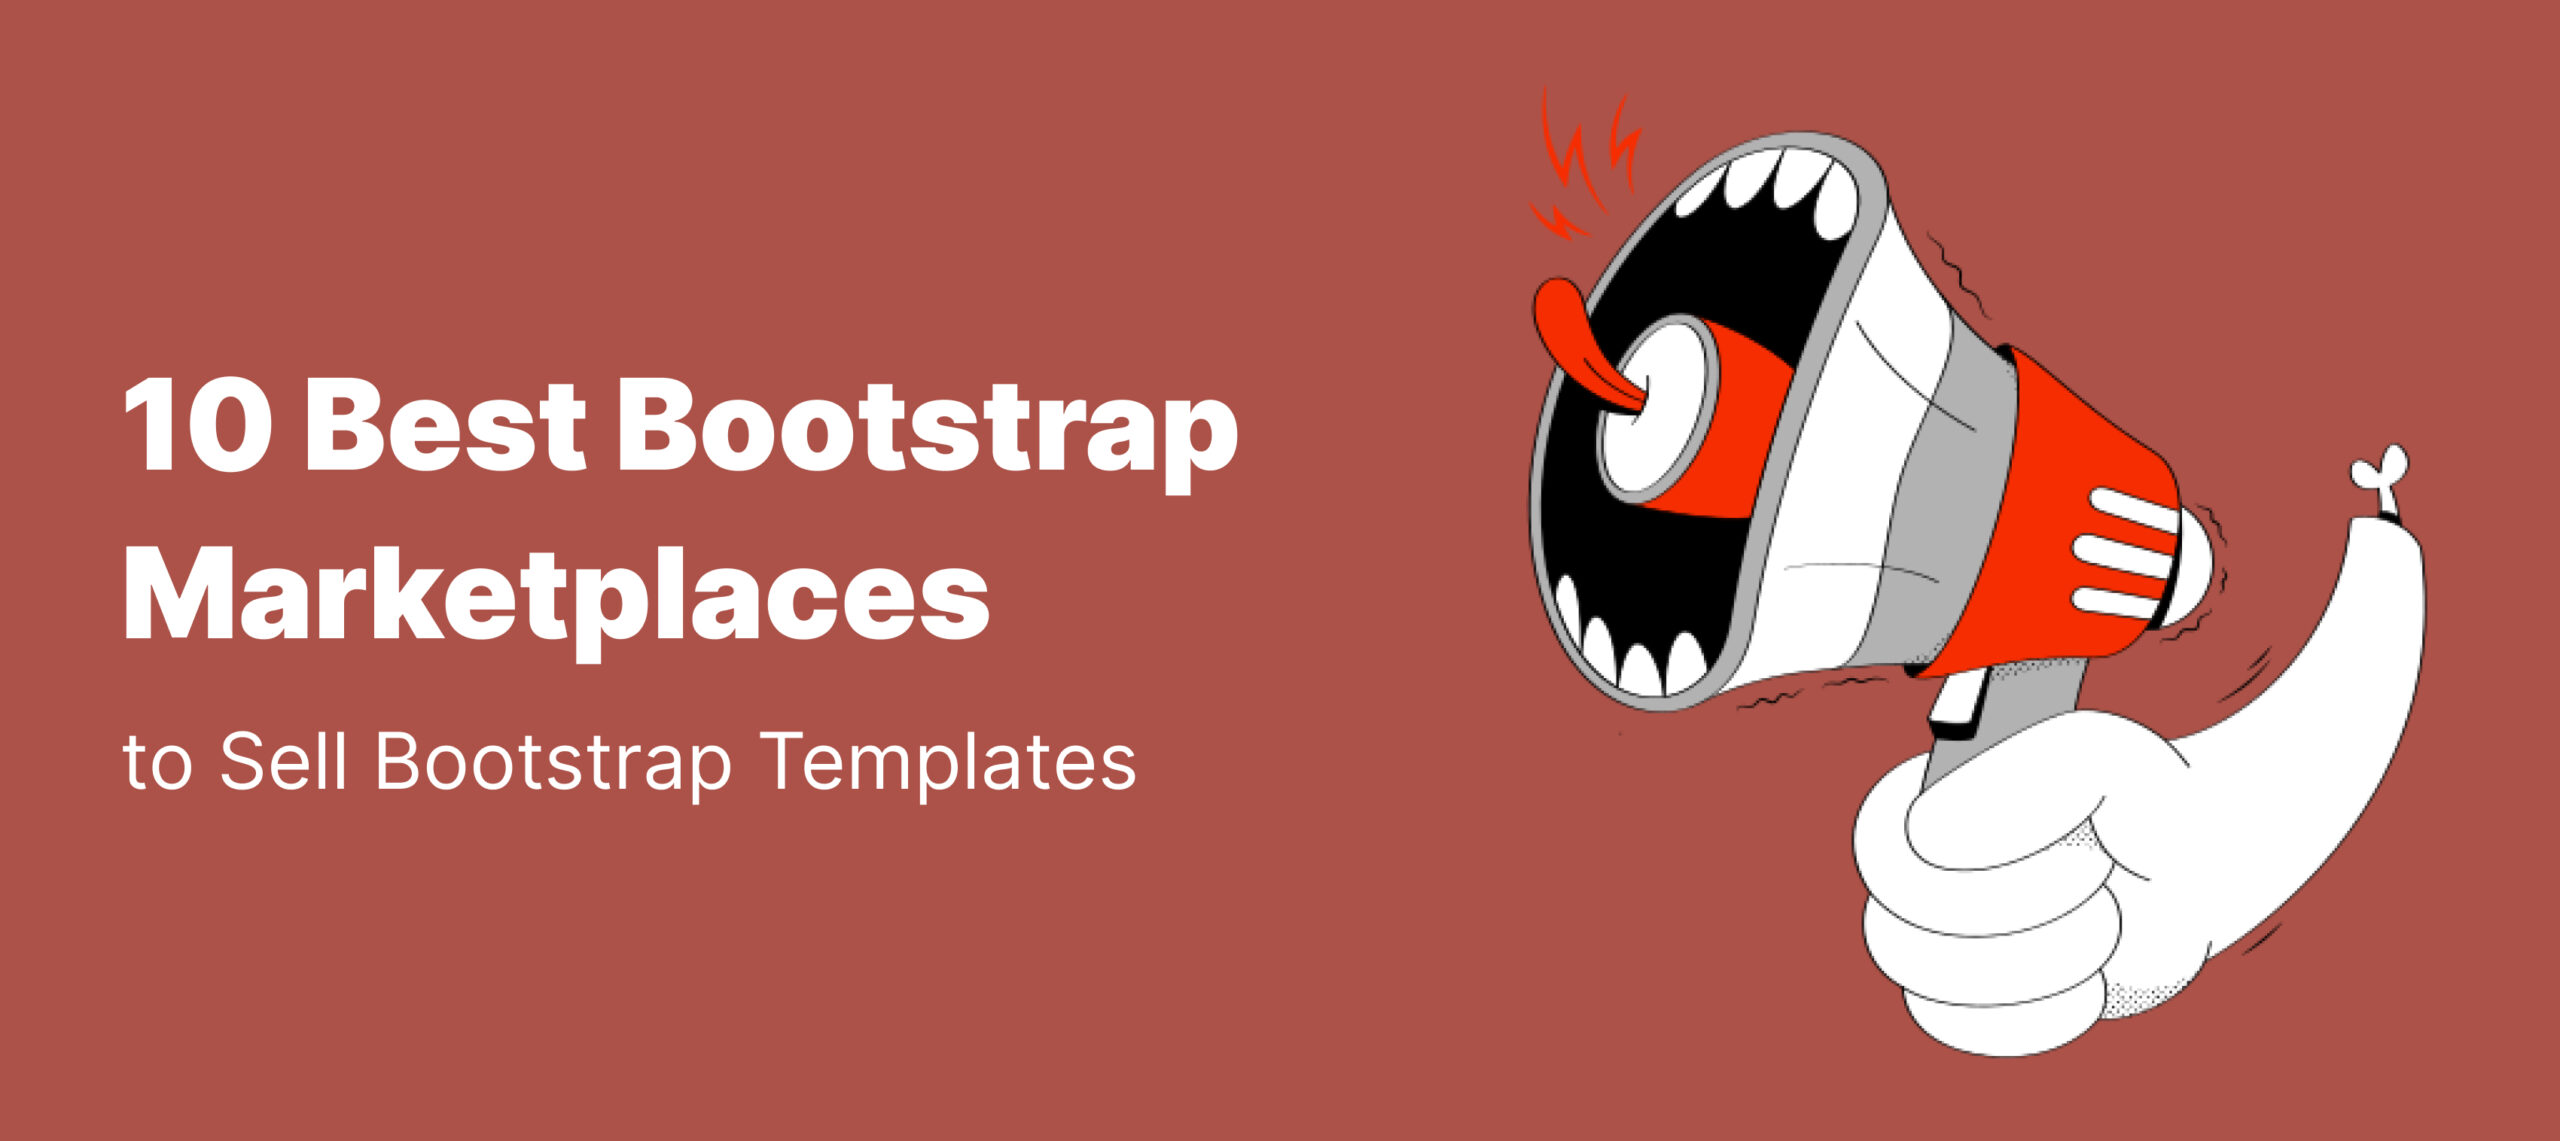  10 Best Bootstrap Marketplaces to Sell Bootstrap Templates